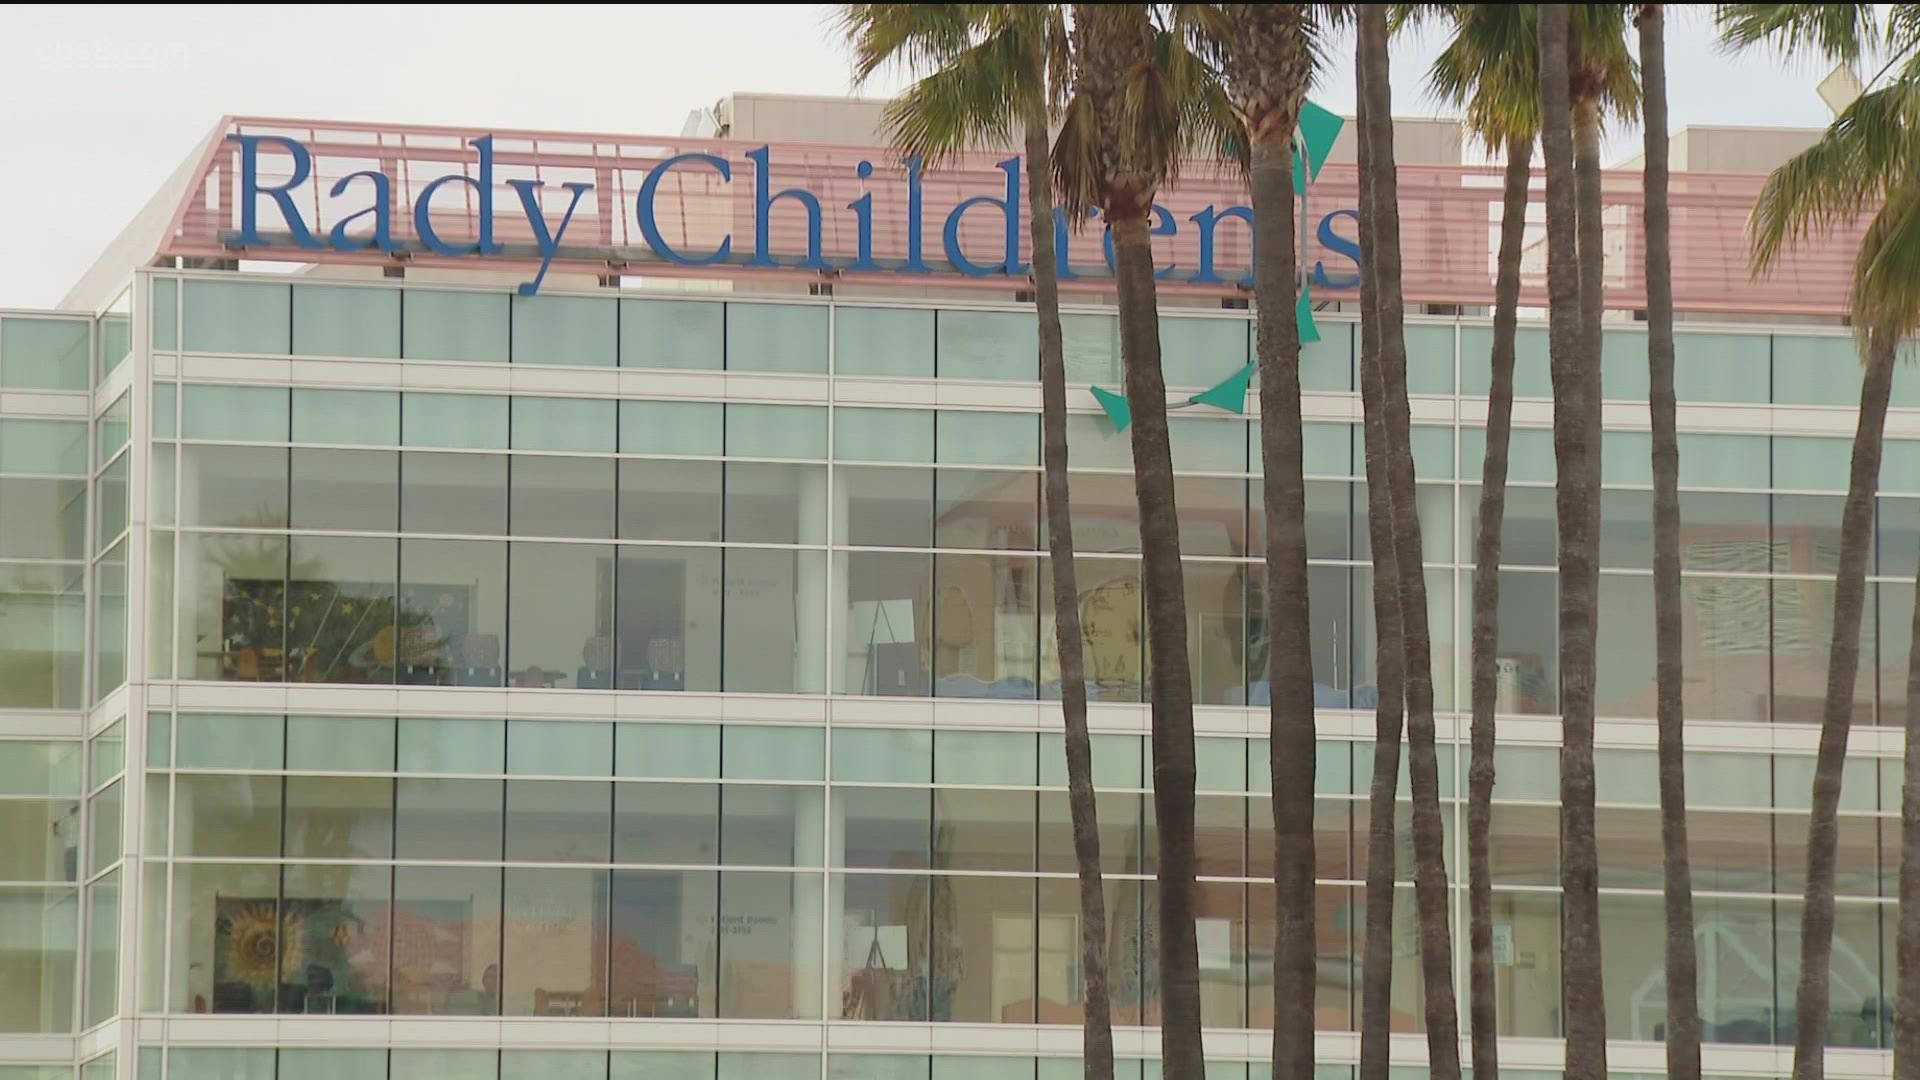 At Rady Children's Hospital, the number of children admitted with COVID has tripled in the past week.